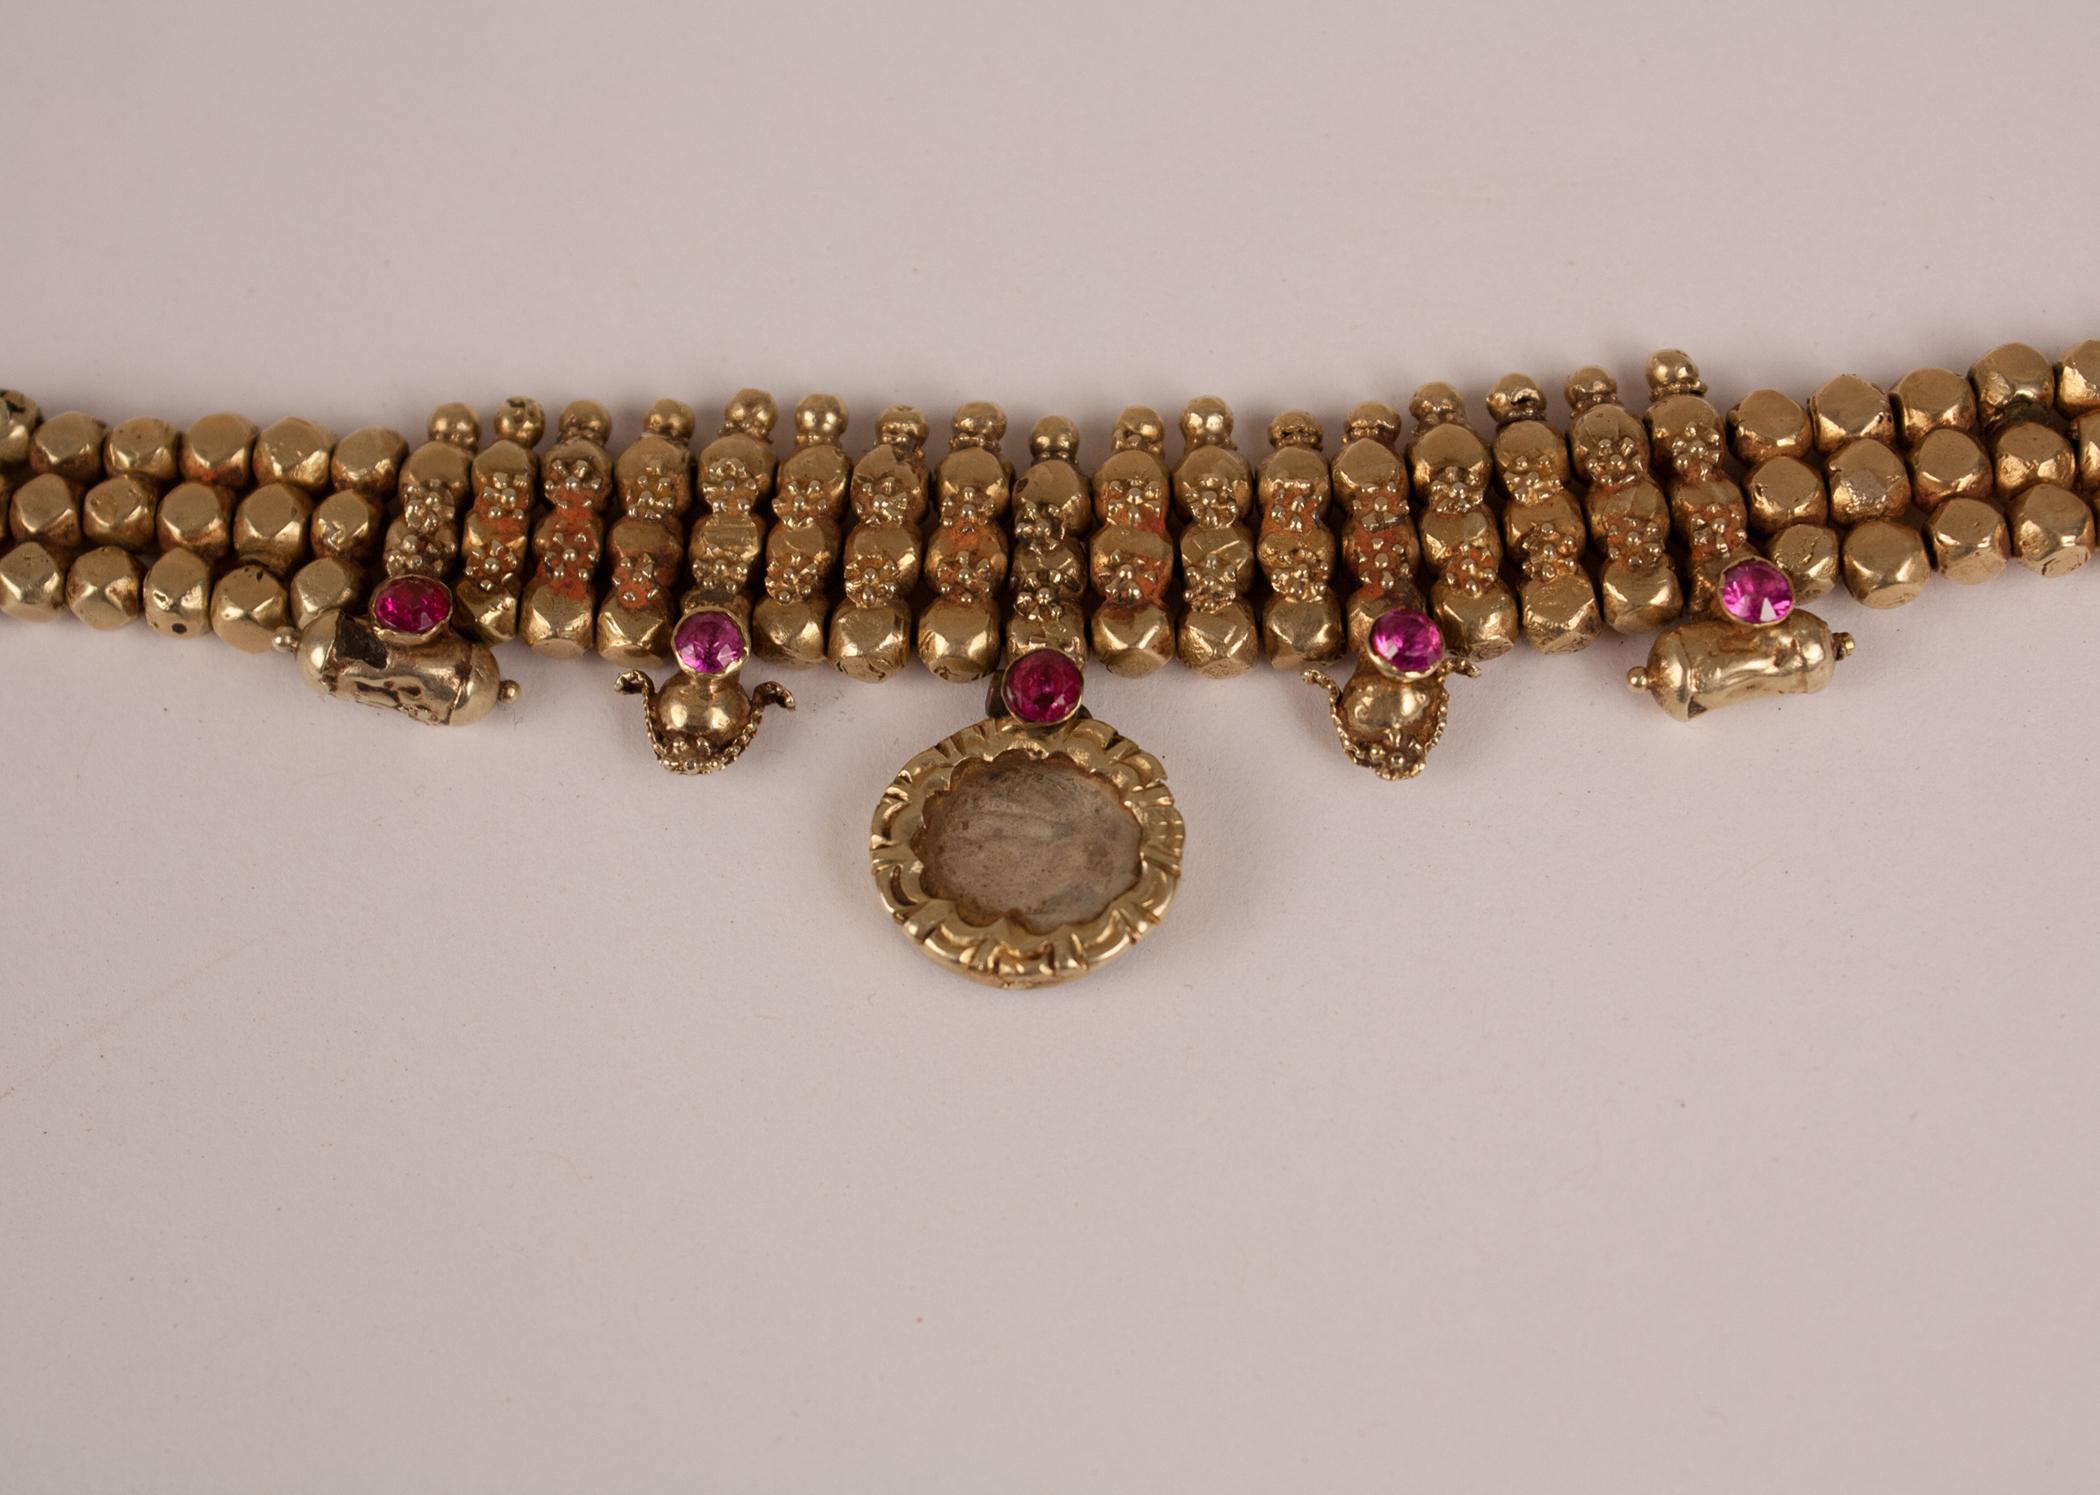 22 Karat Gold, Ruby, Crystal Choker Necklace from India In Good Condition For Sale In Heath, MA